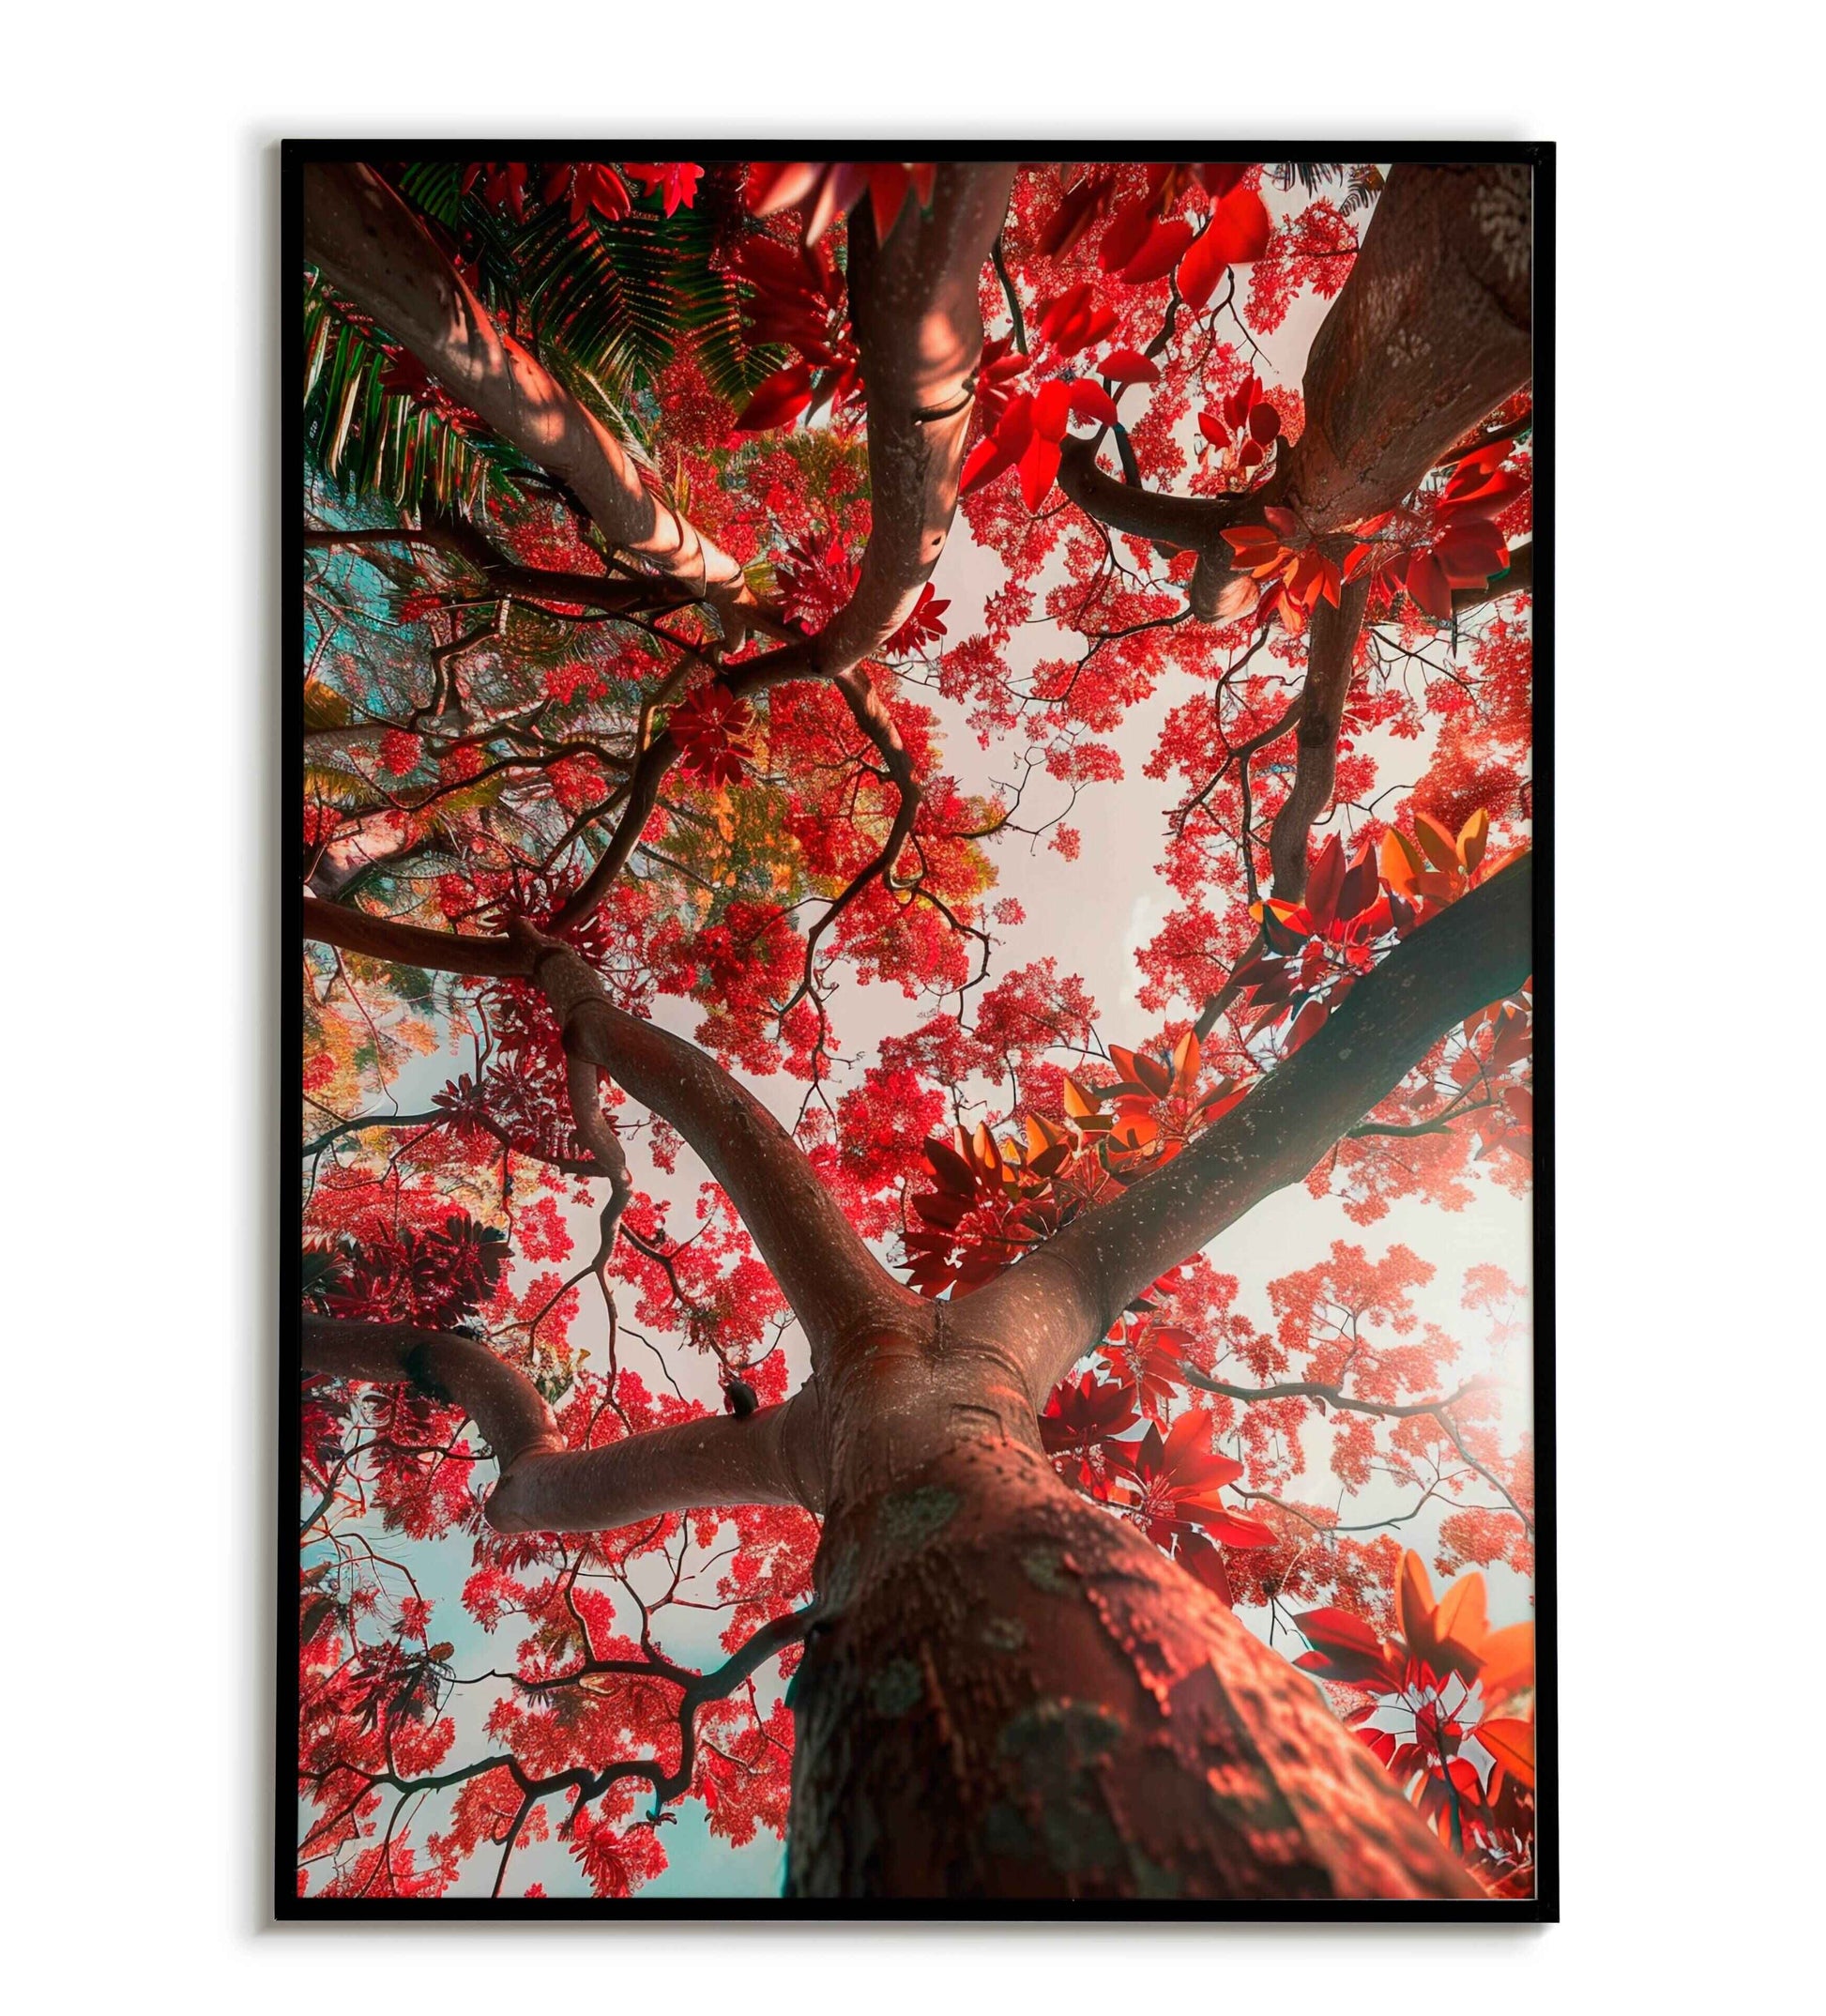 Tree Blossoms printable poster. Available for purchase as a physical poster or digital download